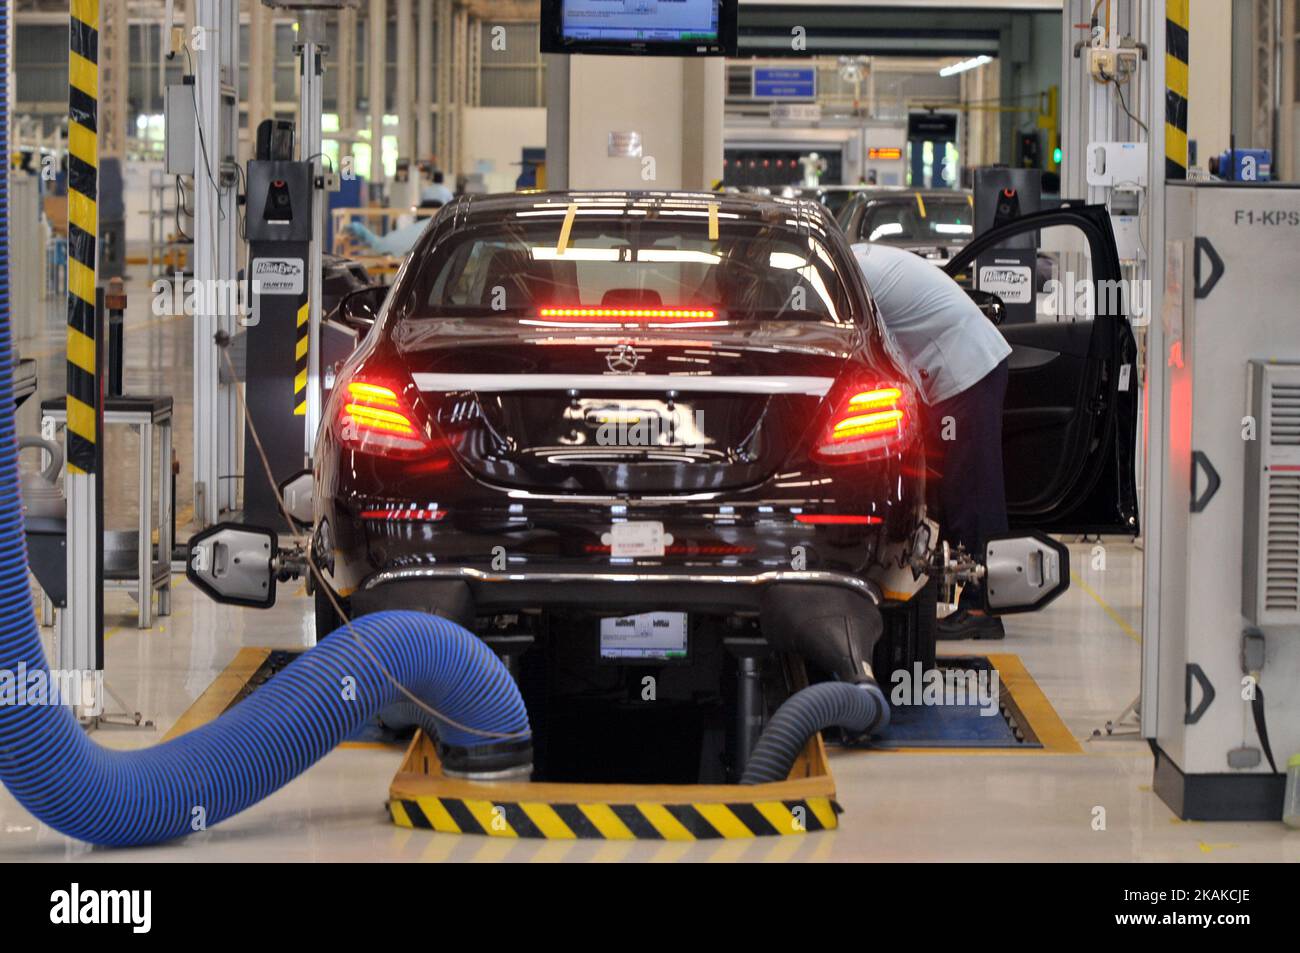 Workers assembling car type sedan E-Class at Mercedes-Benz plant in Wanaherang district, Bogor, West Java, on January 24, 2017. Mercedes-Benz Indonesia started the inaugural assembly in Indonesia for the series E-Class with two variants of the E 250 and E 300 Avantgarde AMG with high technology to increase sales in Asia, especially in Indonesia. Dasril Roszandi (Photo by Dasril Roszandi/NurPhoto) *** Please Use Credit from Credit Field *** Stock Photo